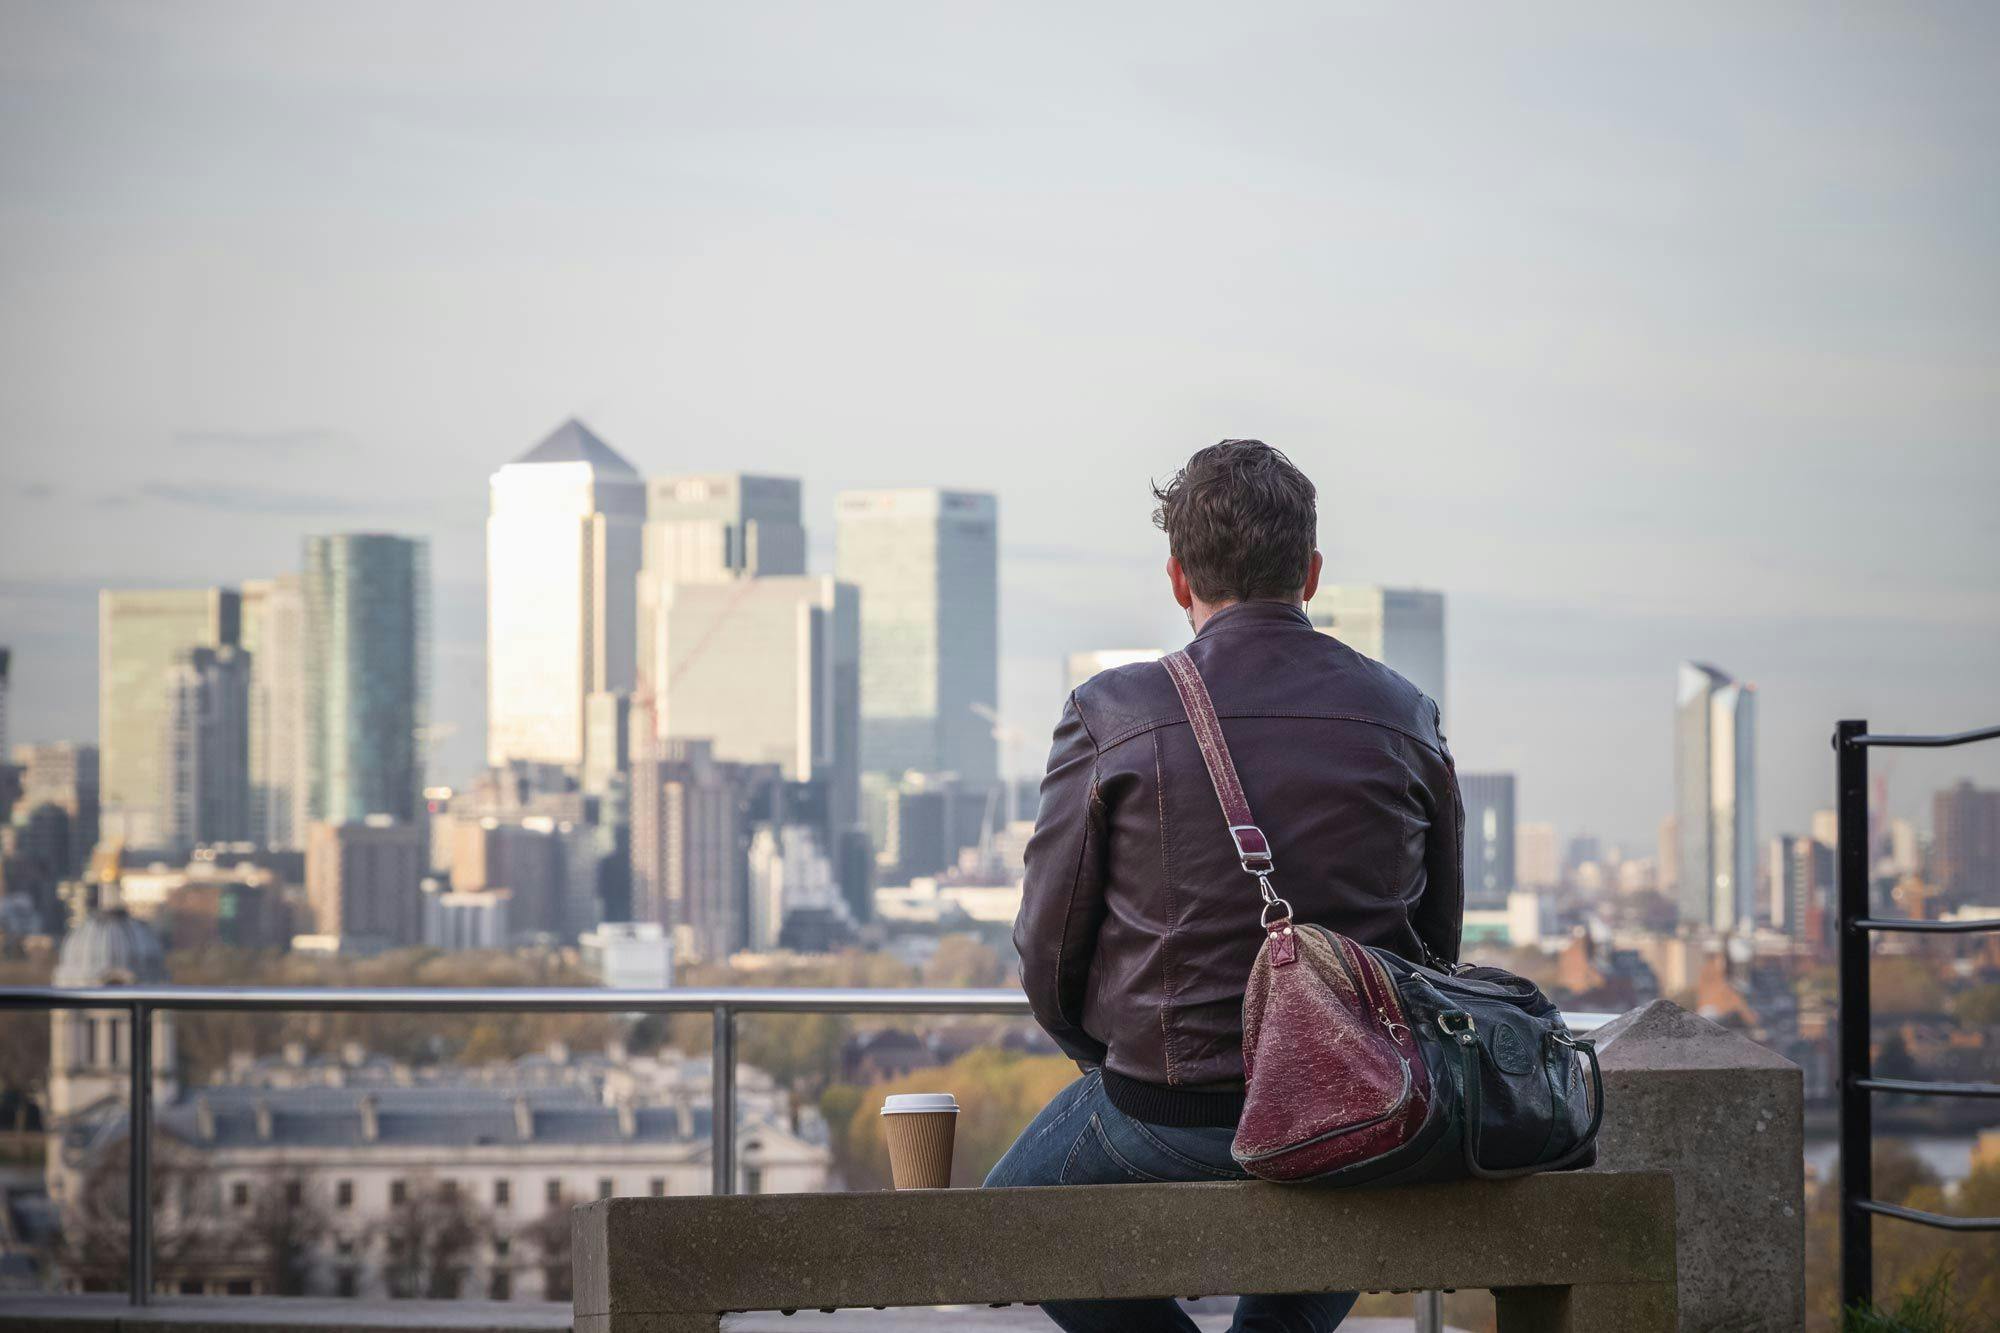 Lonely in London – How Guardianship can bring people together.